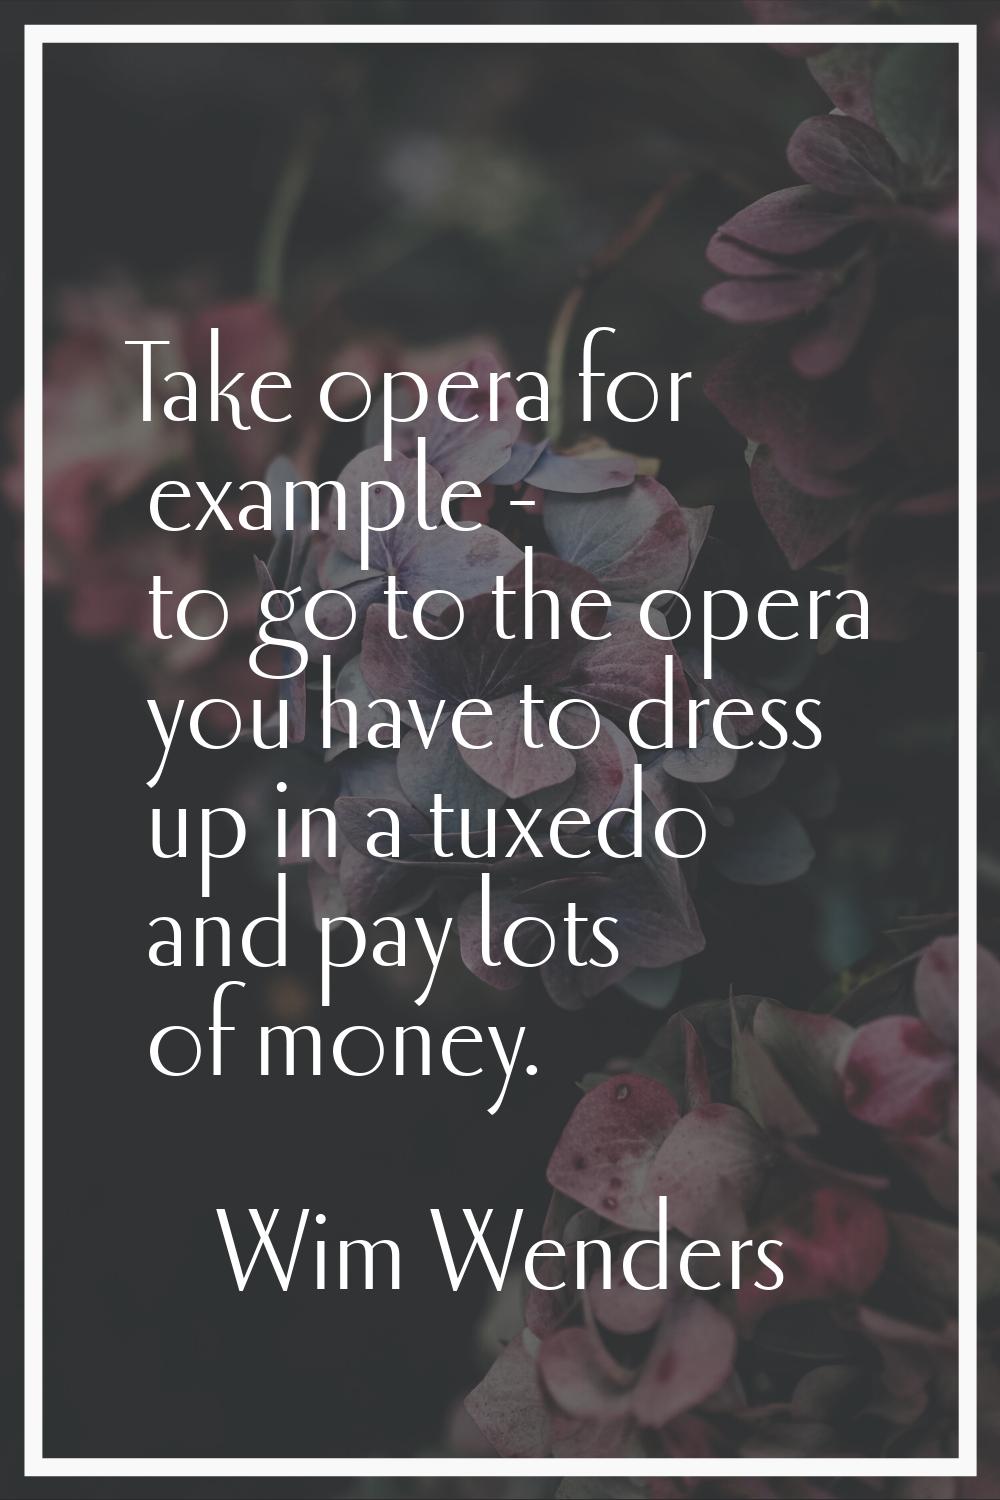 Take opera for example - to go to the opera you have to dress up in a tuxedo and pay lots of money.